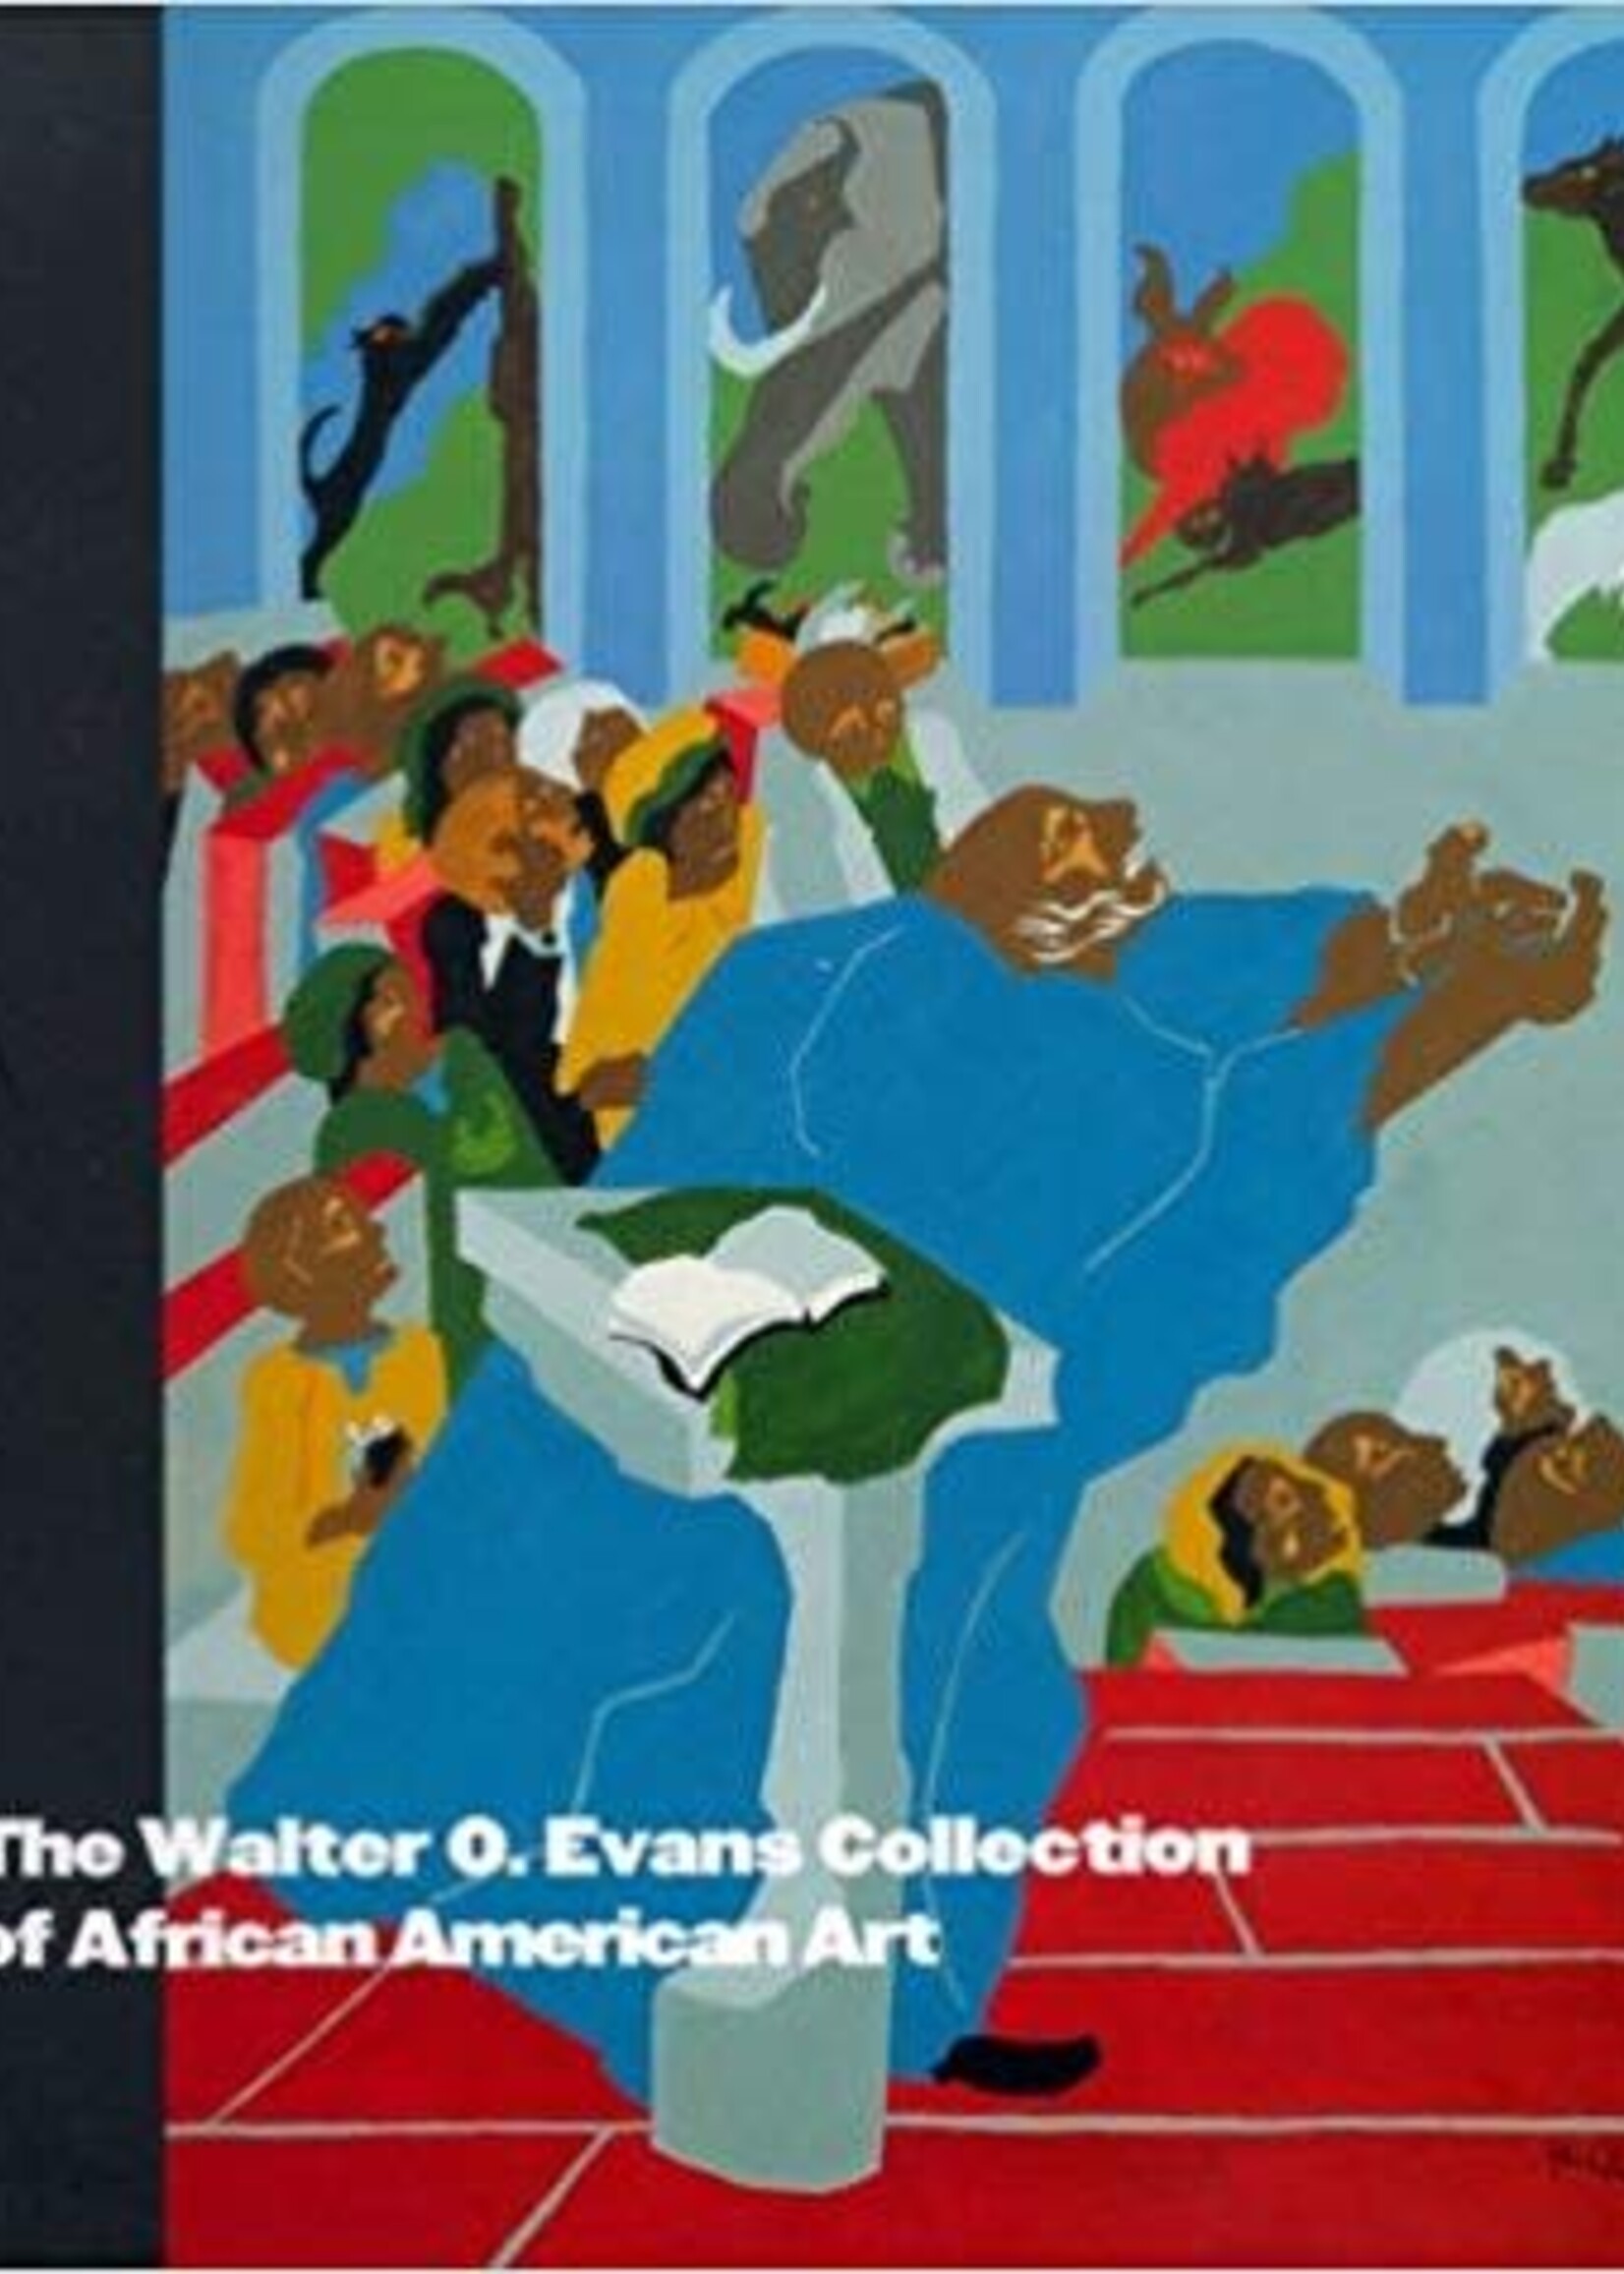 SCAD The Walter O. Evans Collection of African American Art